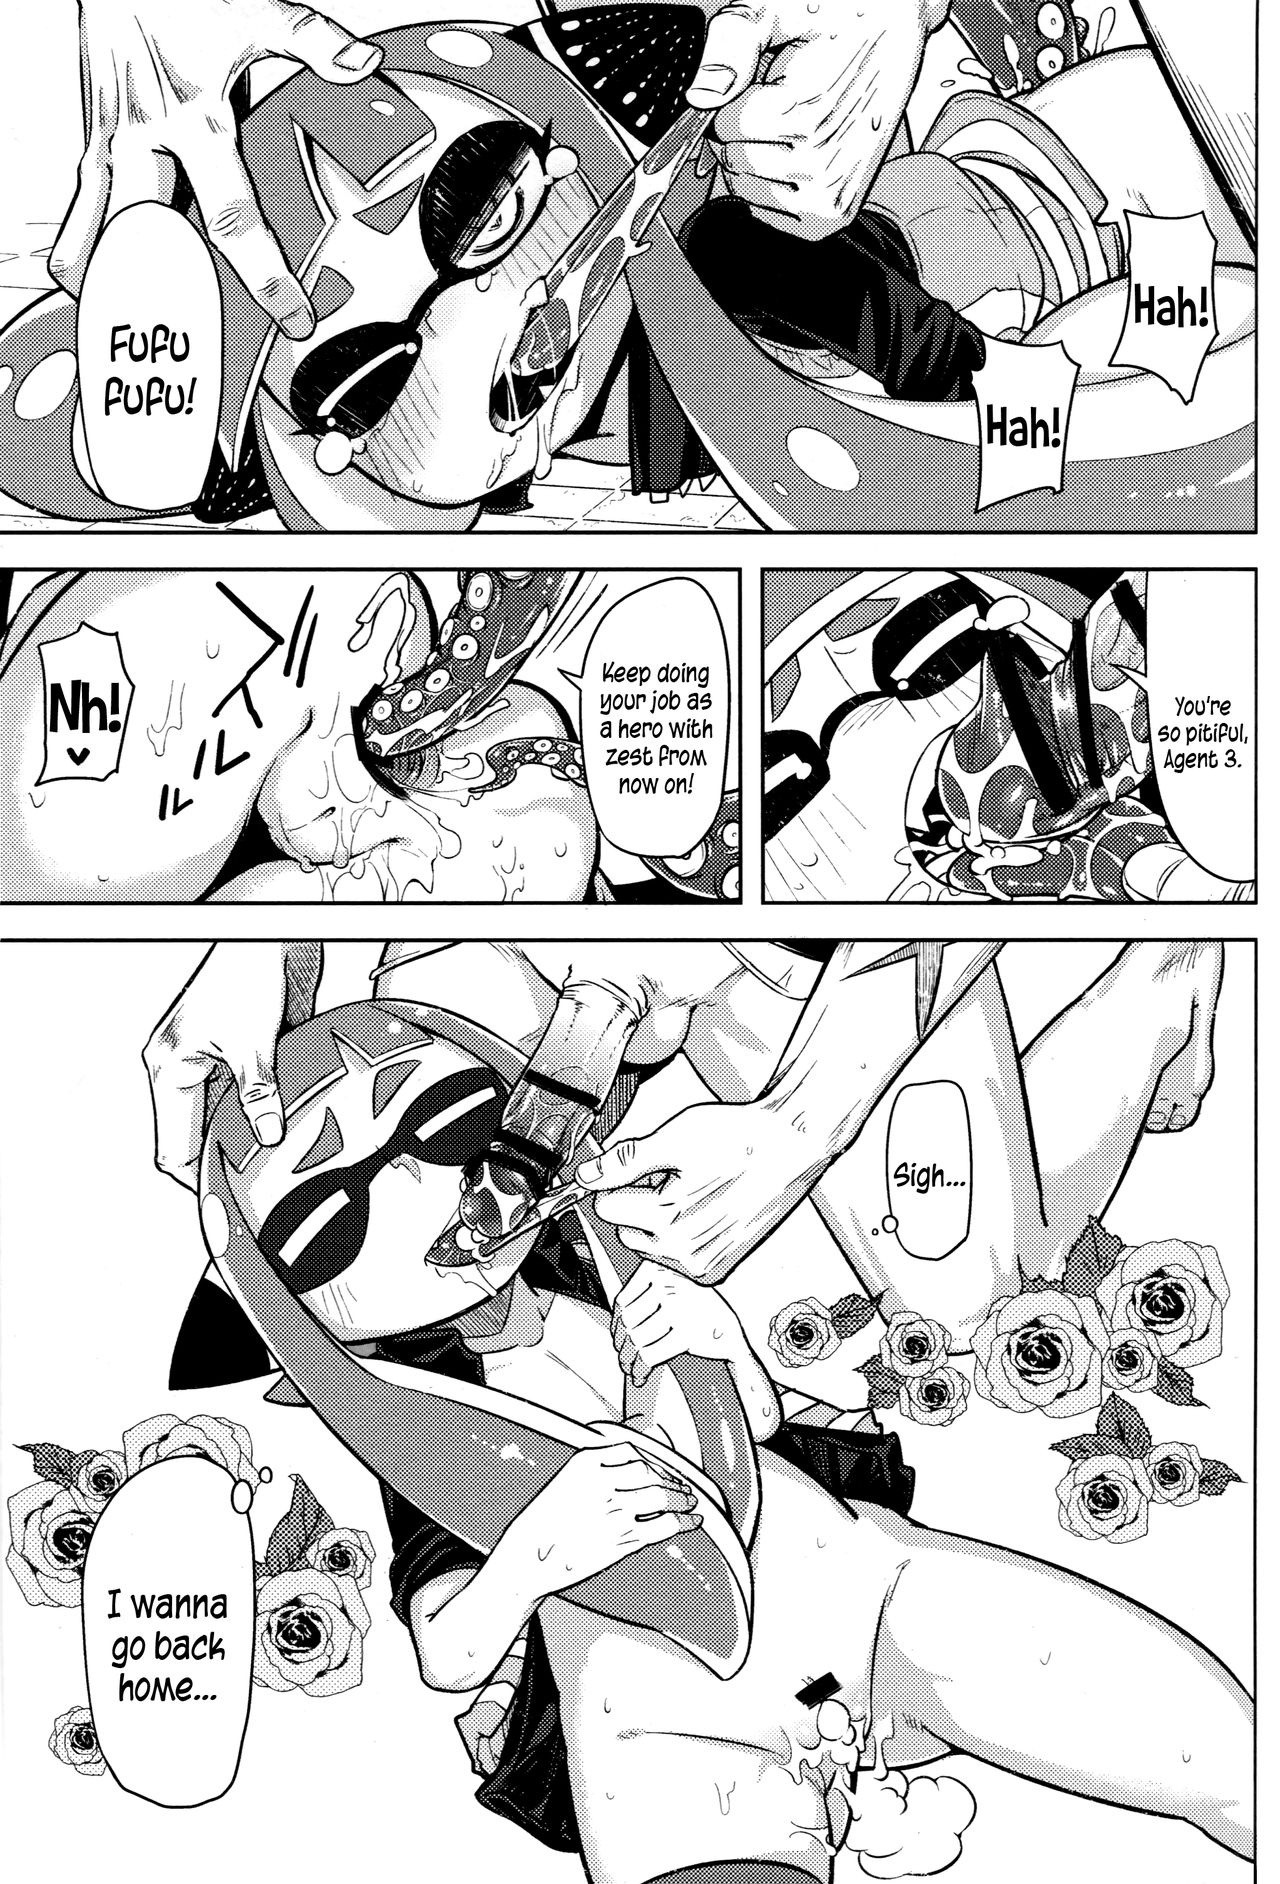 Hero by a Hair's Breadth hentai manga picture 21